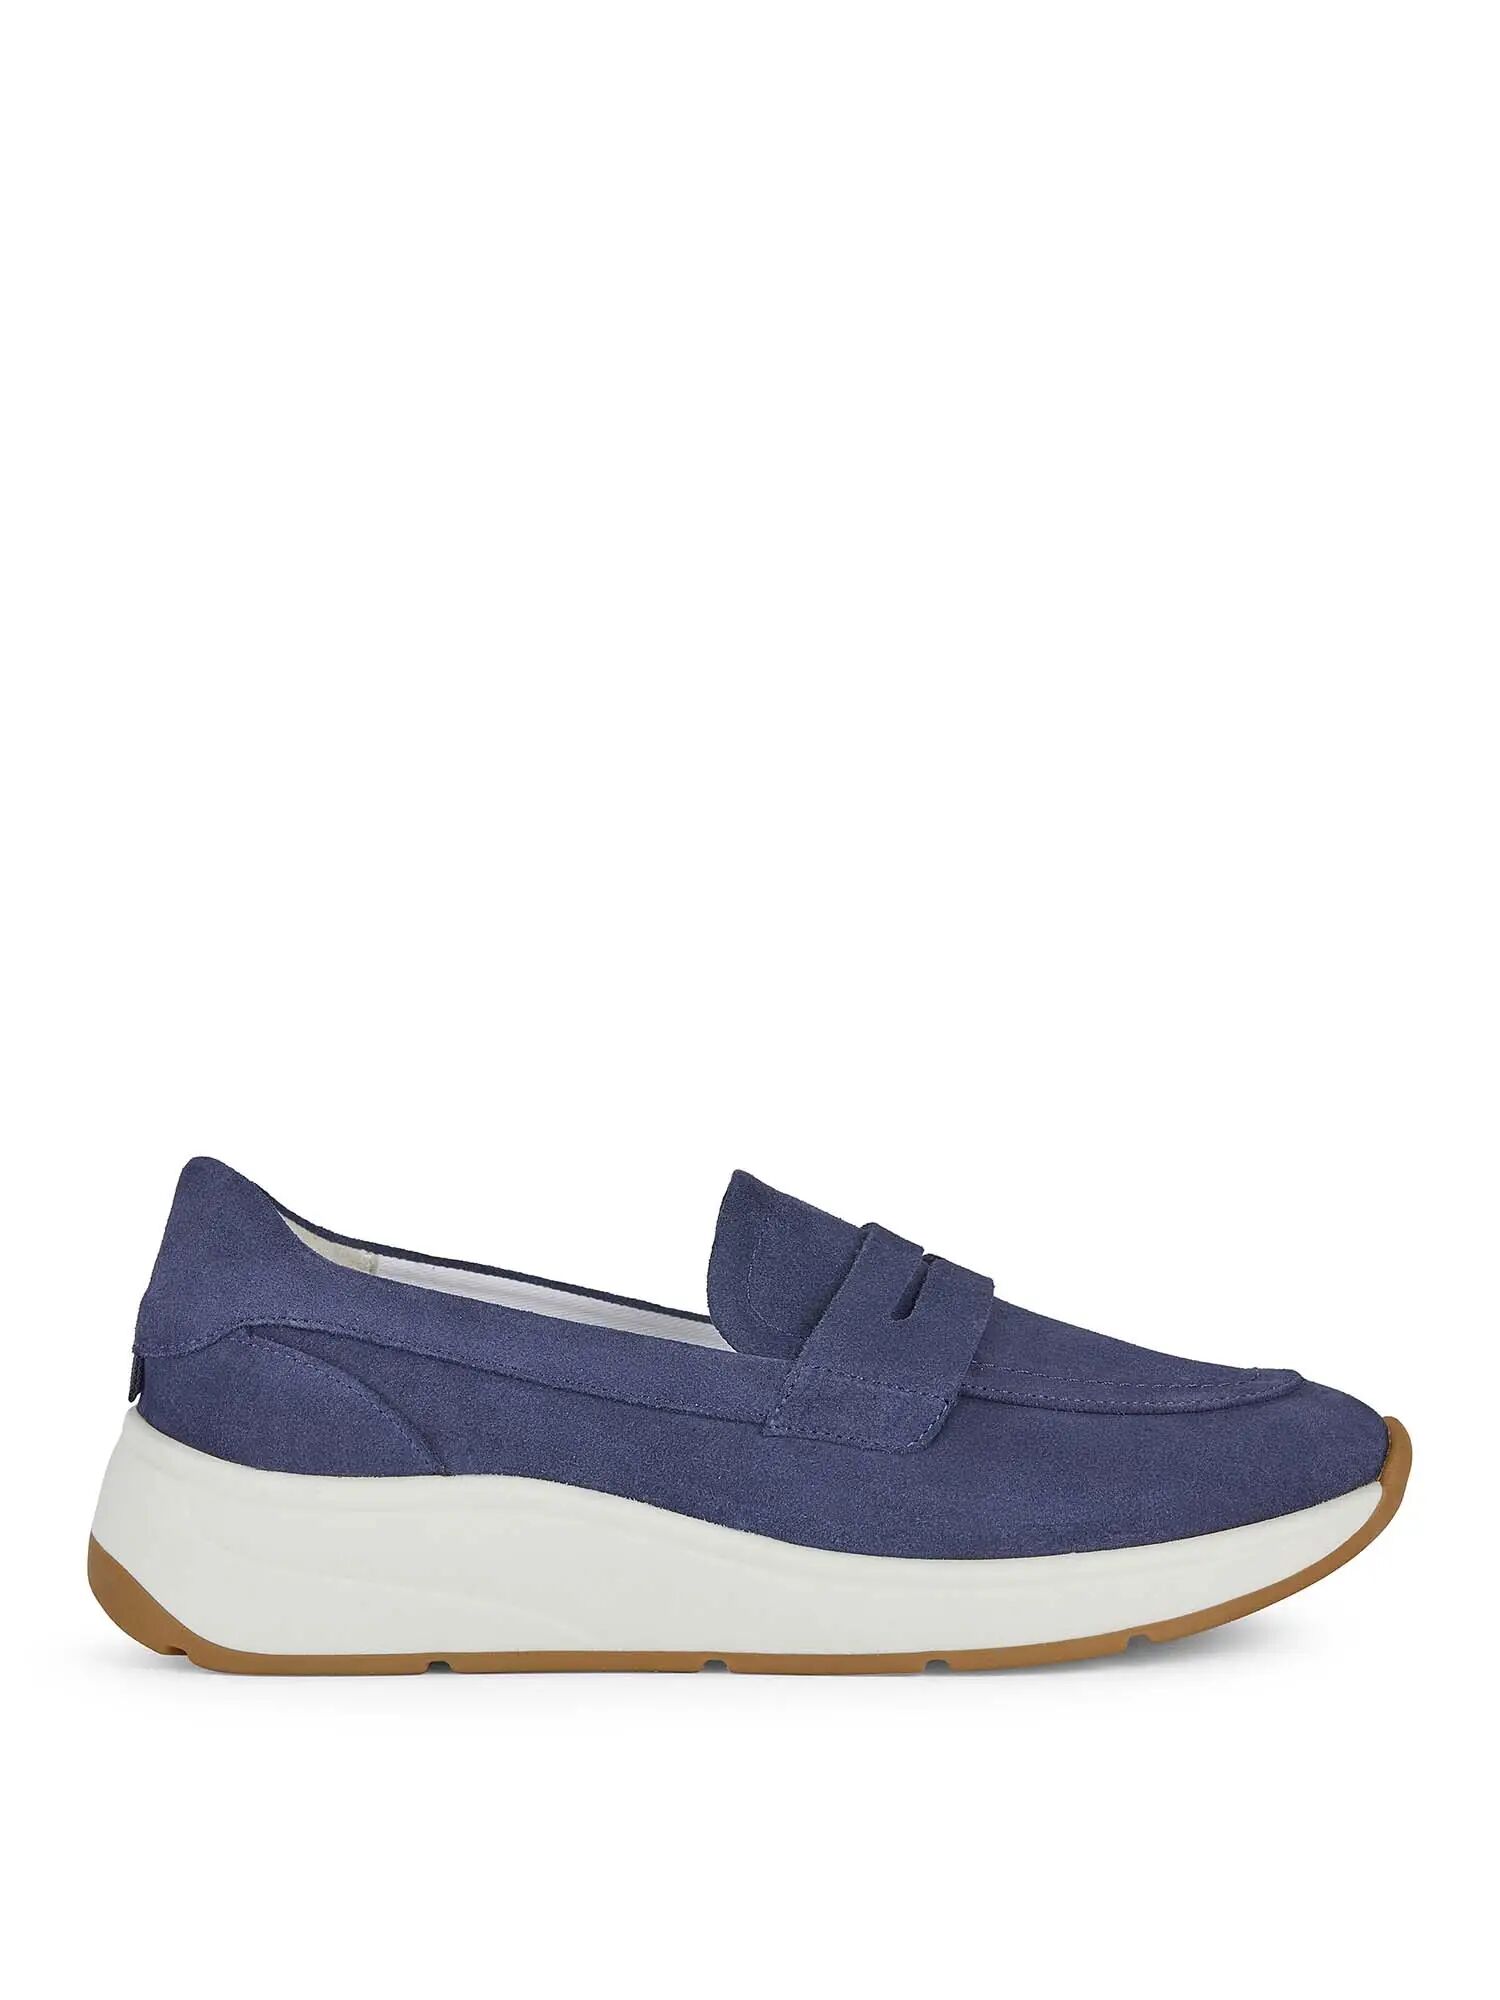 Geox Mocassino Donna Colore Navy NAVY 35